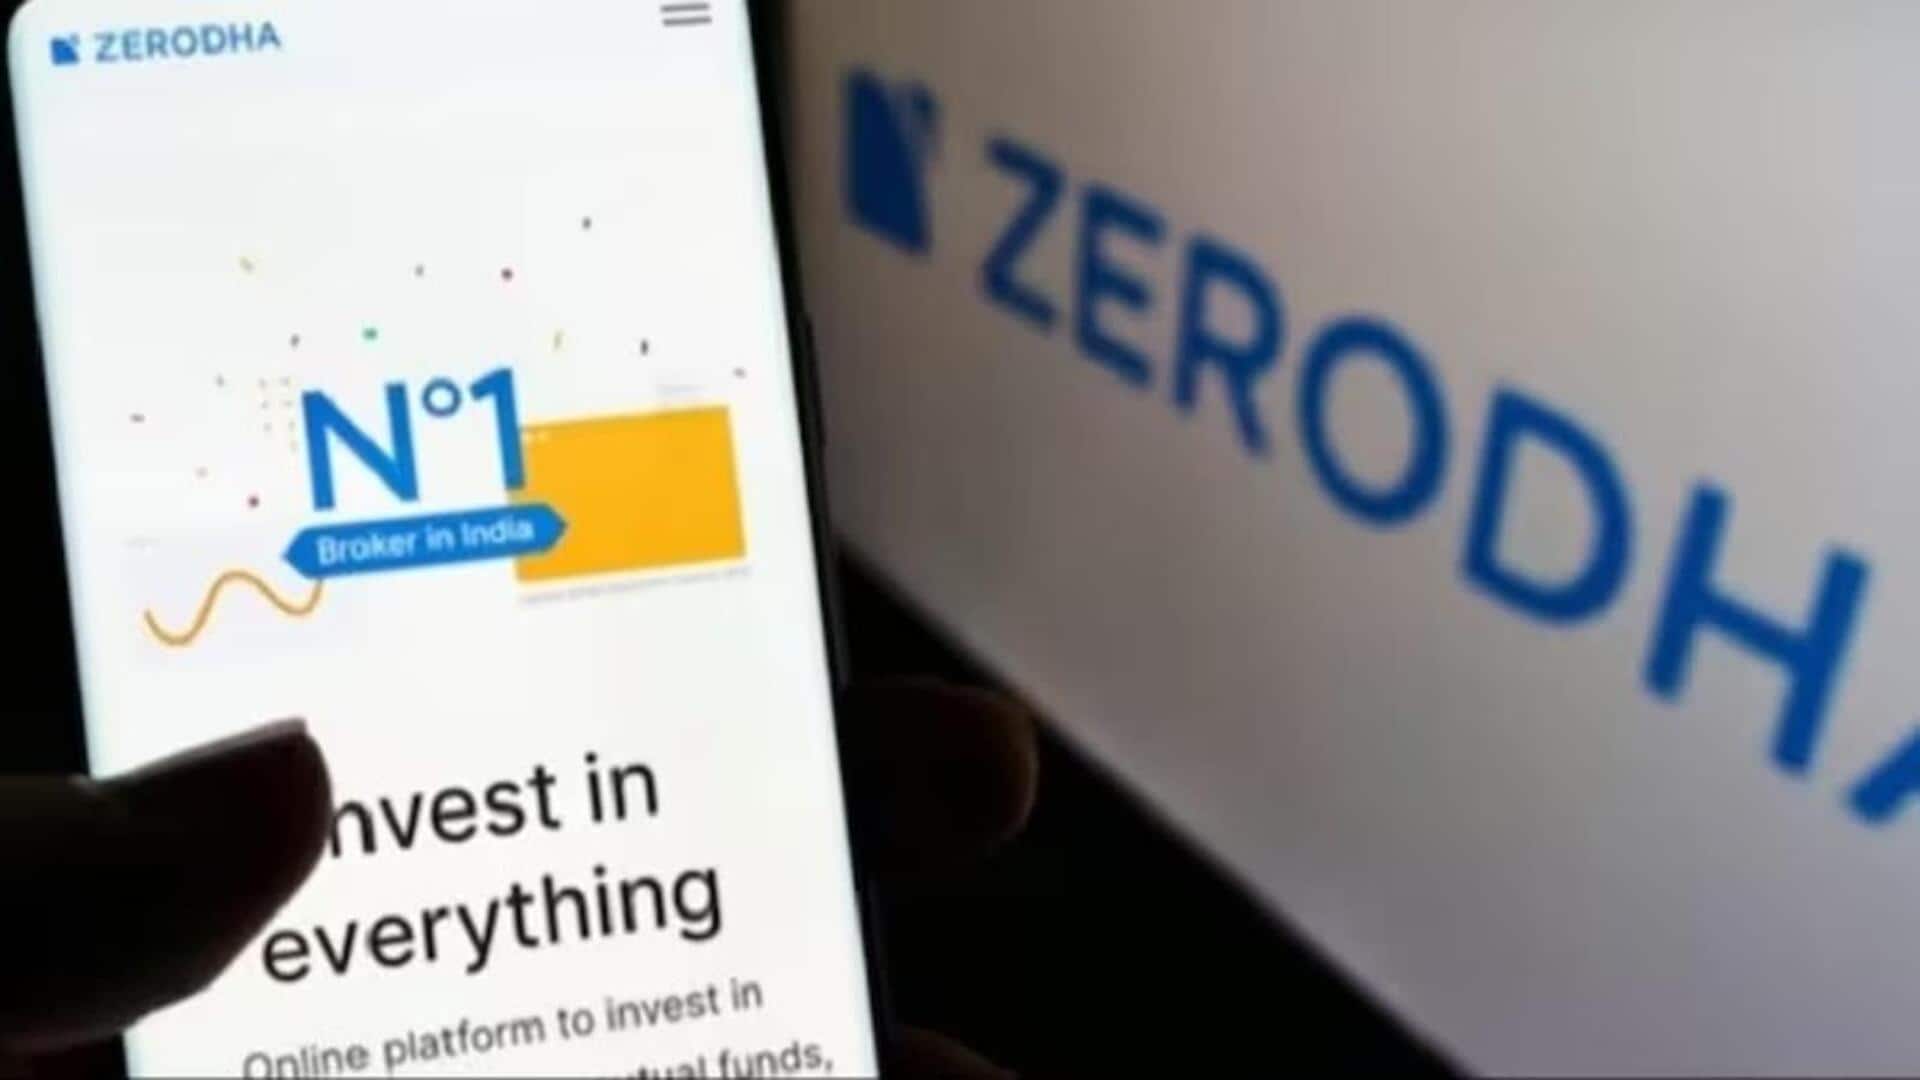 Zerodha MF expands offerings with launch of large-cap, mid-cap ETFs